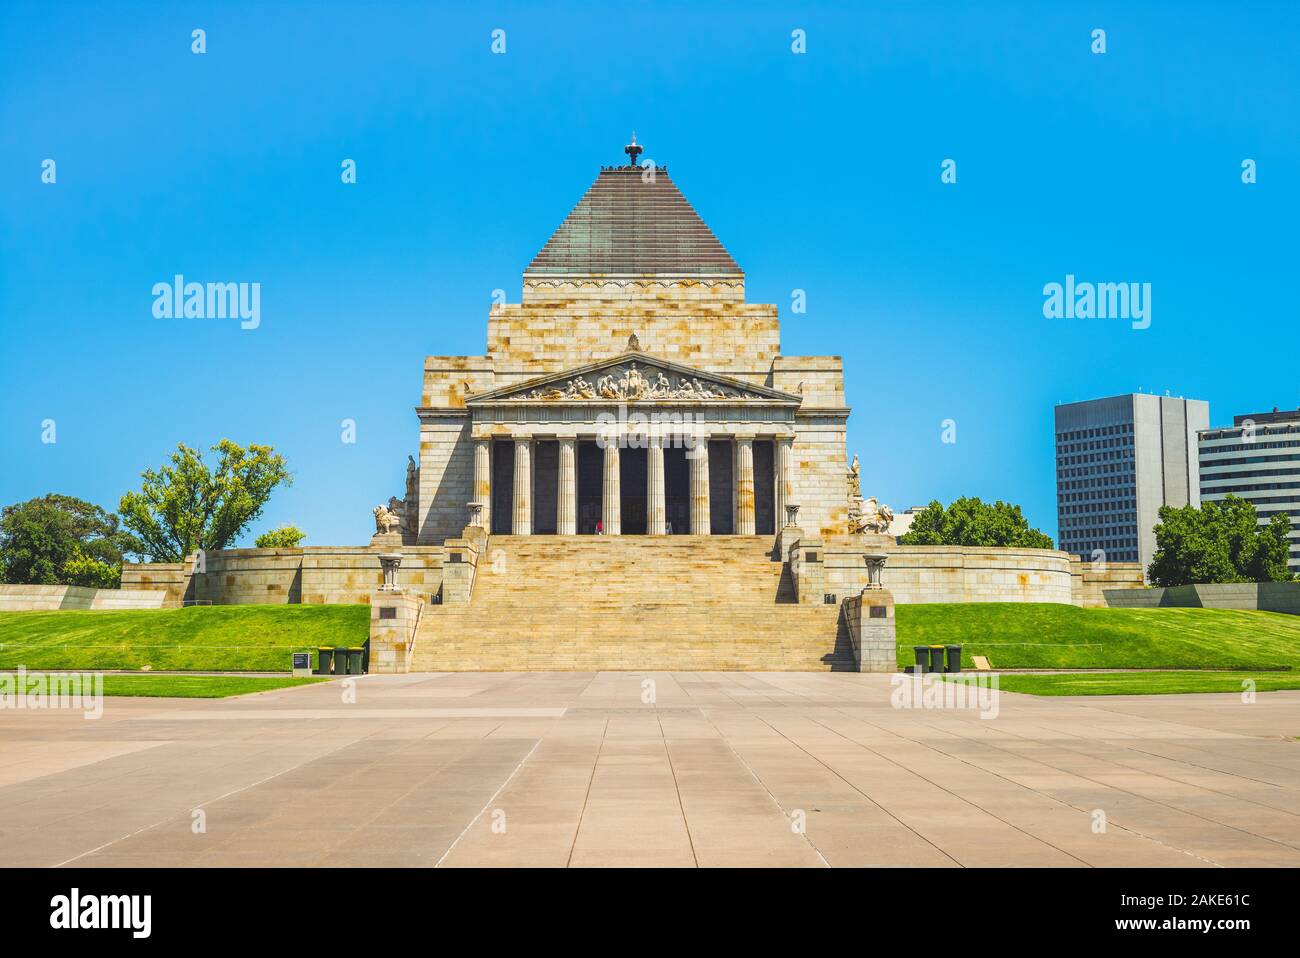 Melbourne, Australia - January 1, 2019: Shrine of Remembrance that is built to honour the men and women of Victoria who served in World War I Stock Photo